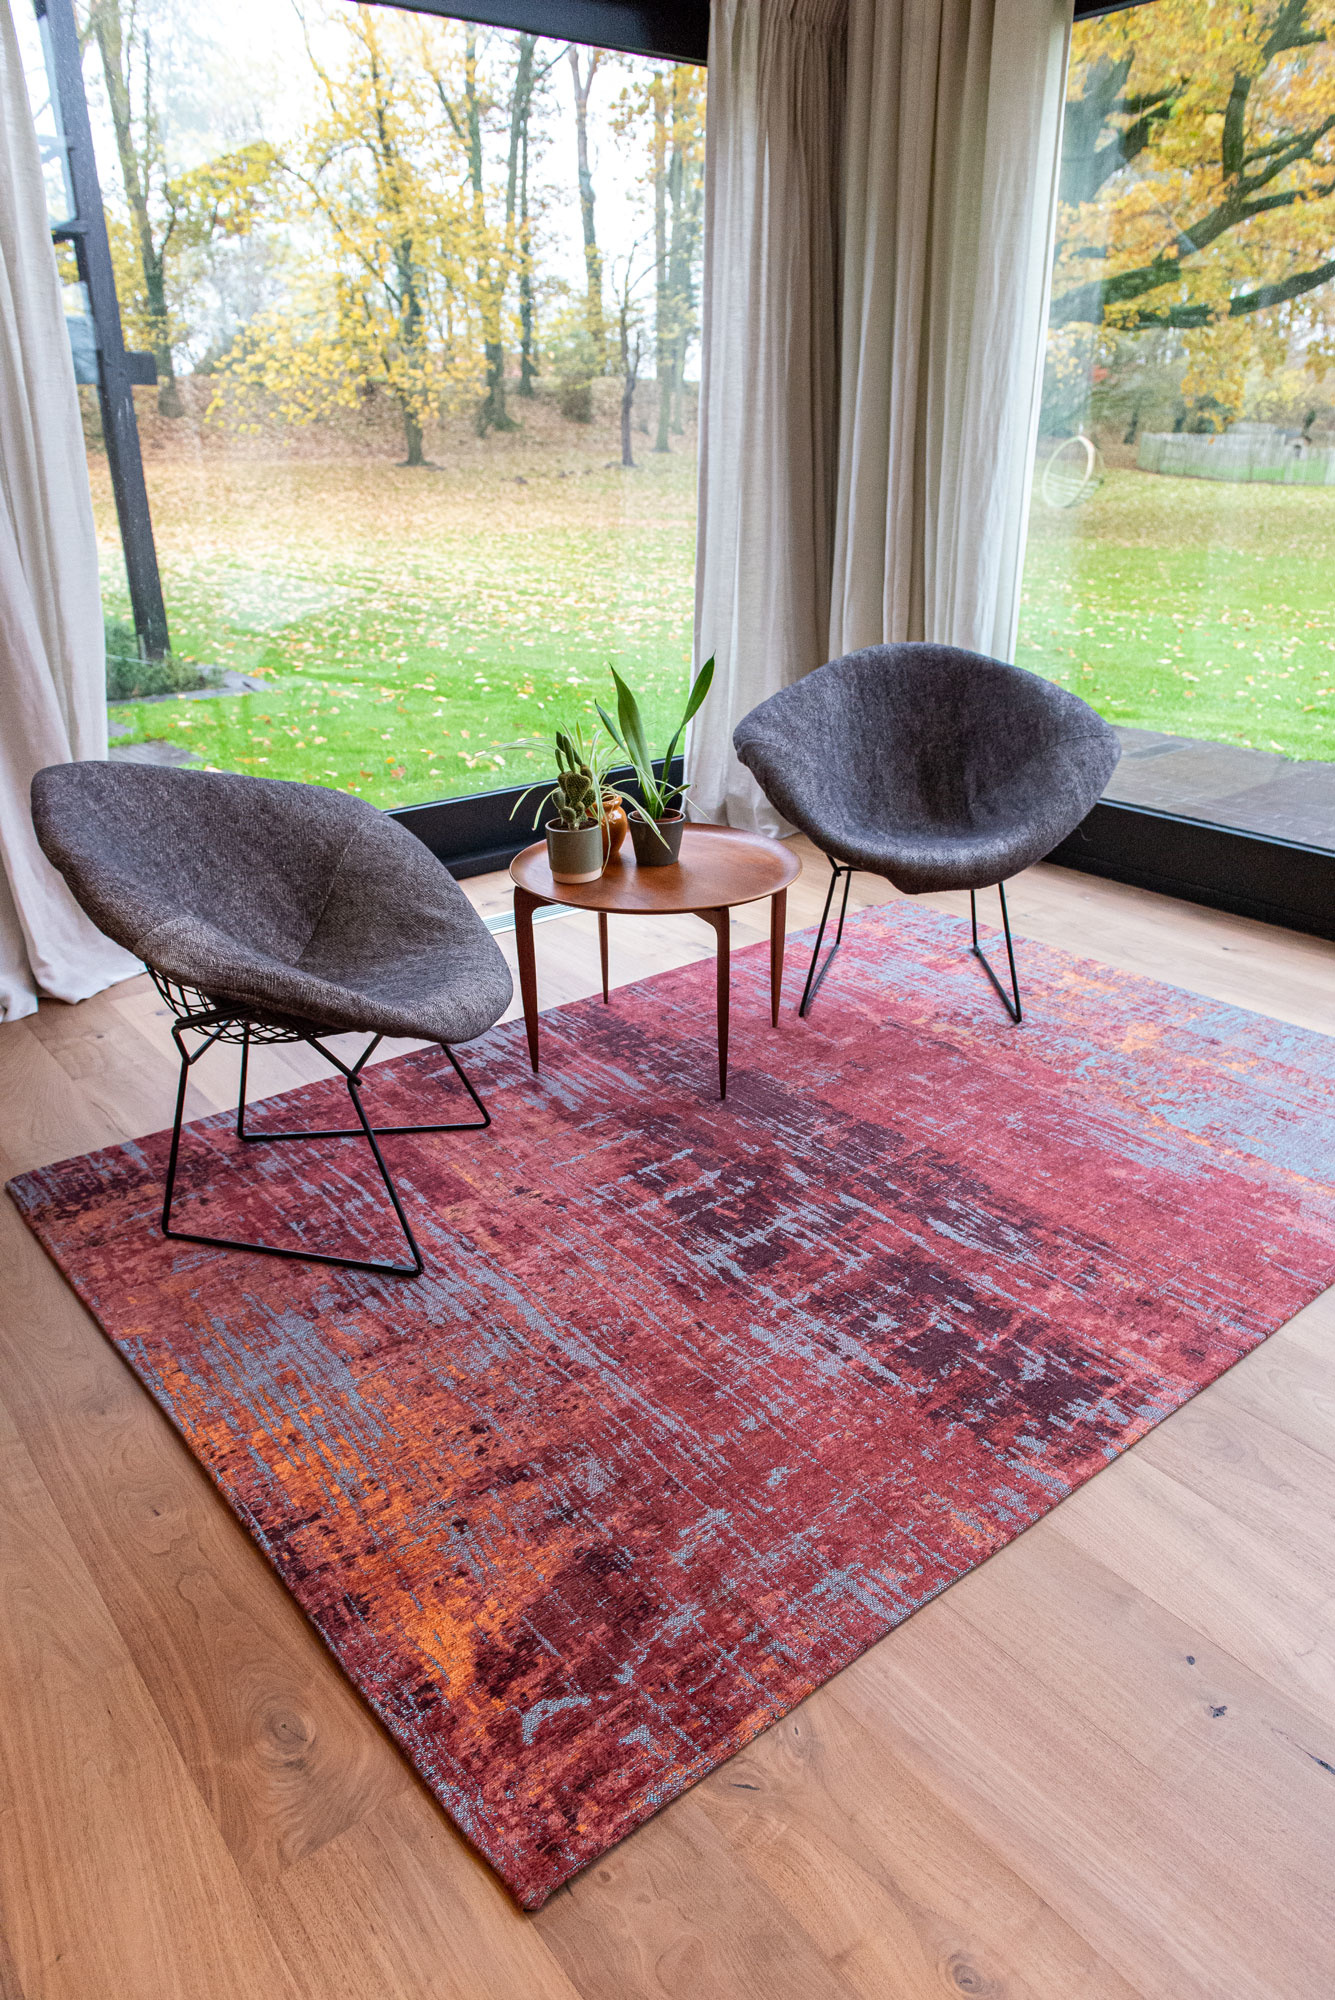 Abstract Flatwoven Red Rug ☞ Size: 6' 7" x 9' 2" (200 x 280 cm)